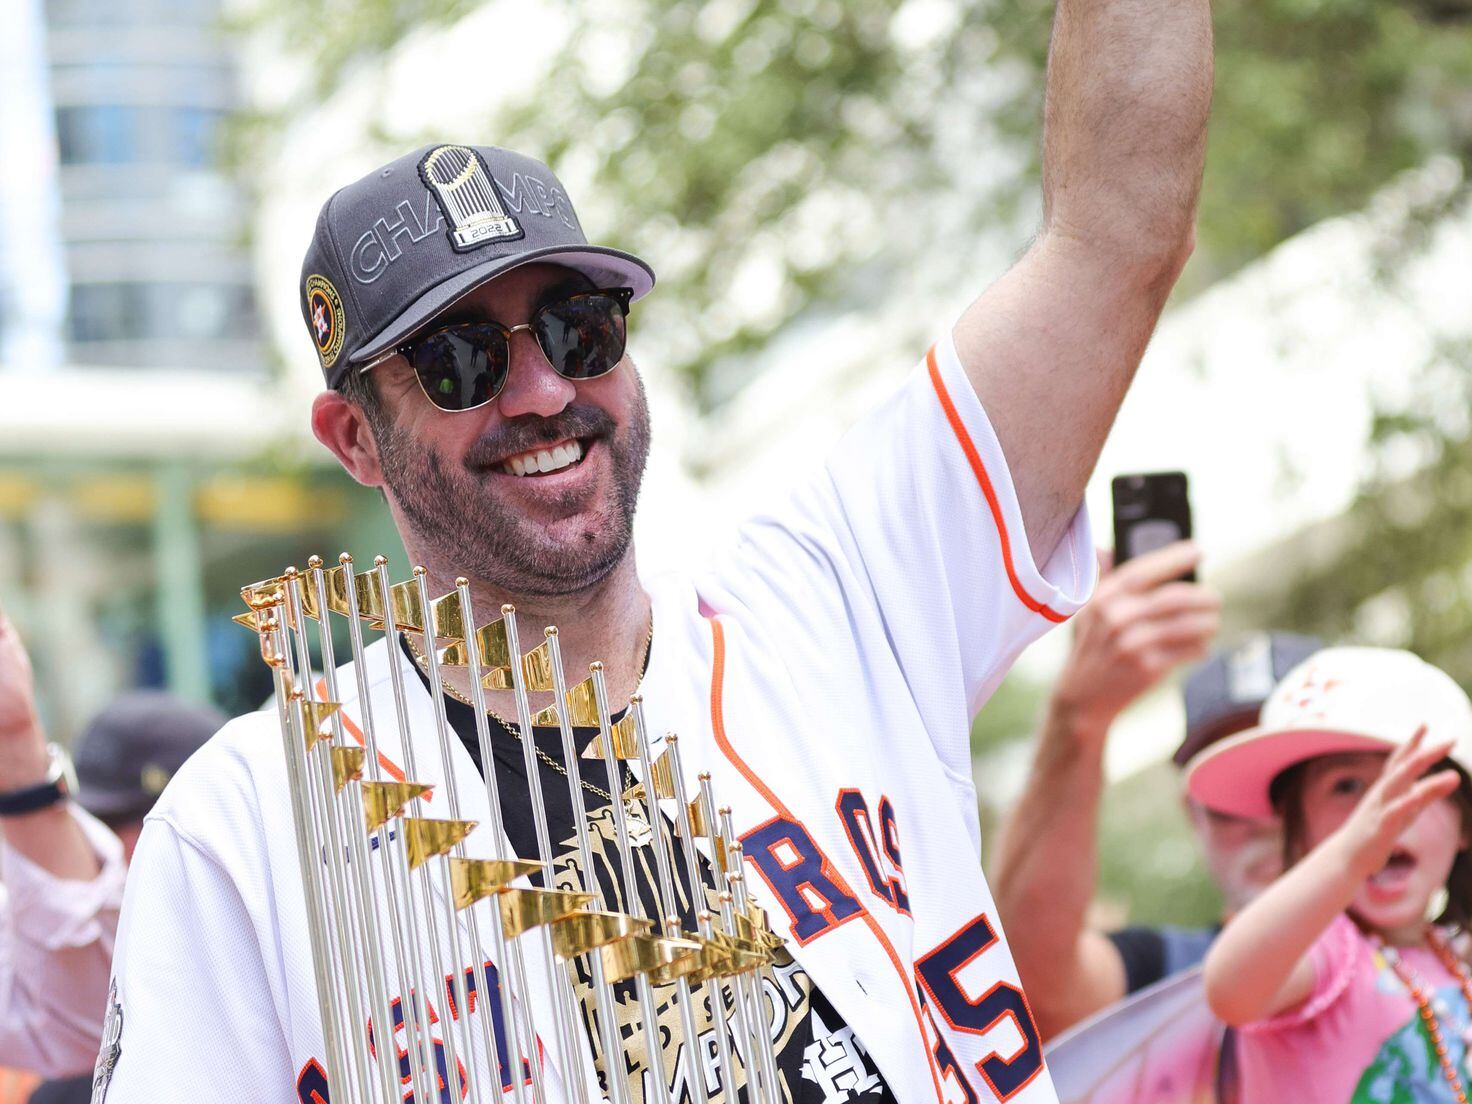 Justin Verlander could secure second unanimous Cy Young